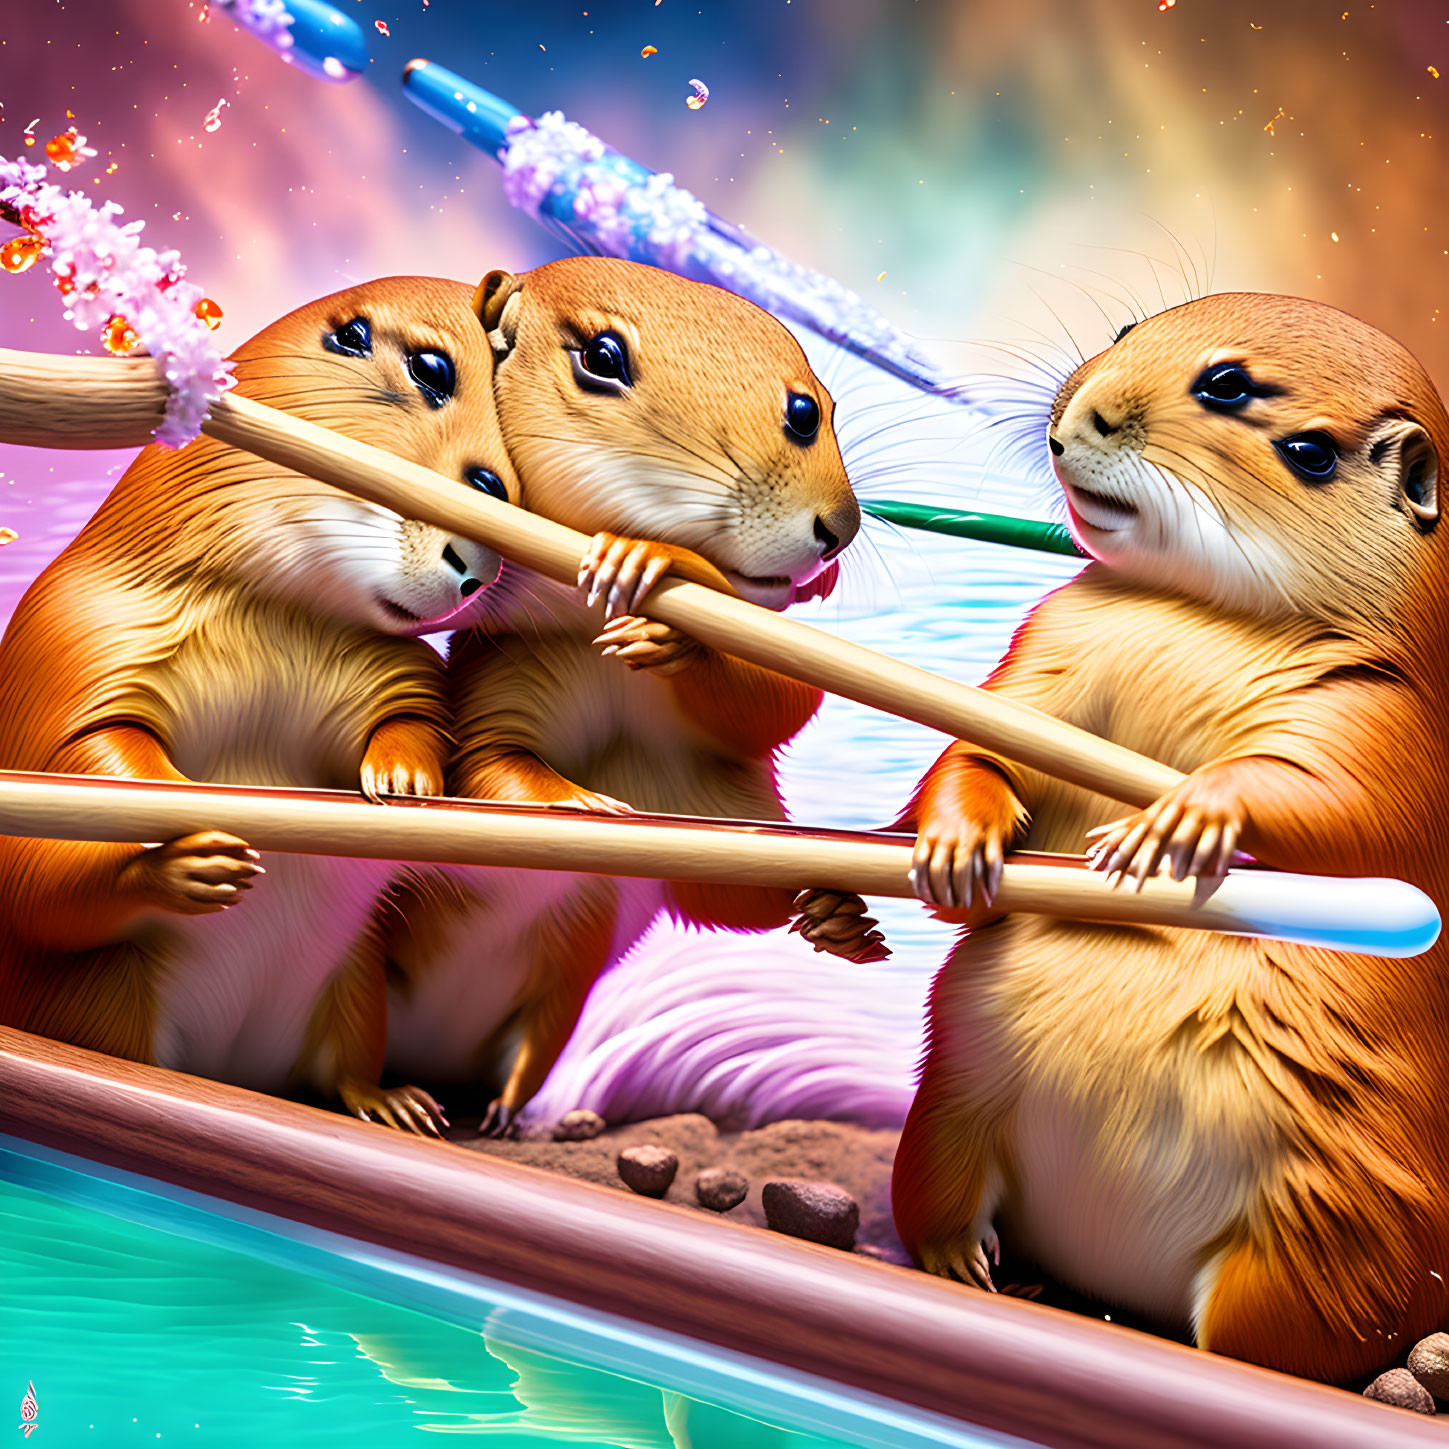 Colorful animated scene: Three beavers rowing boat in fantastical setting